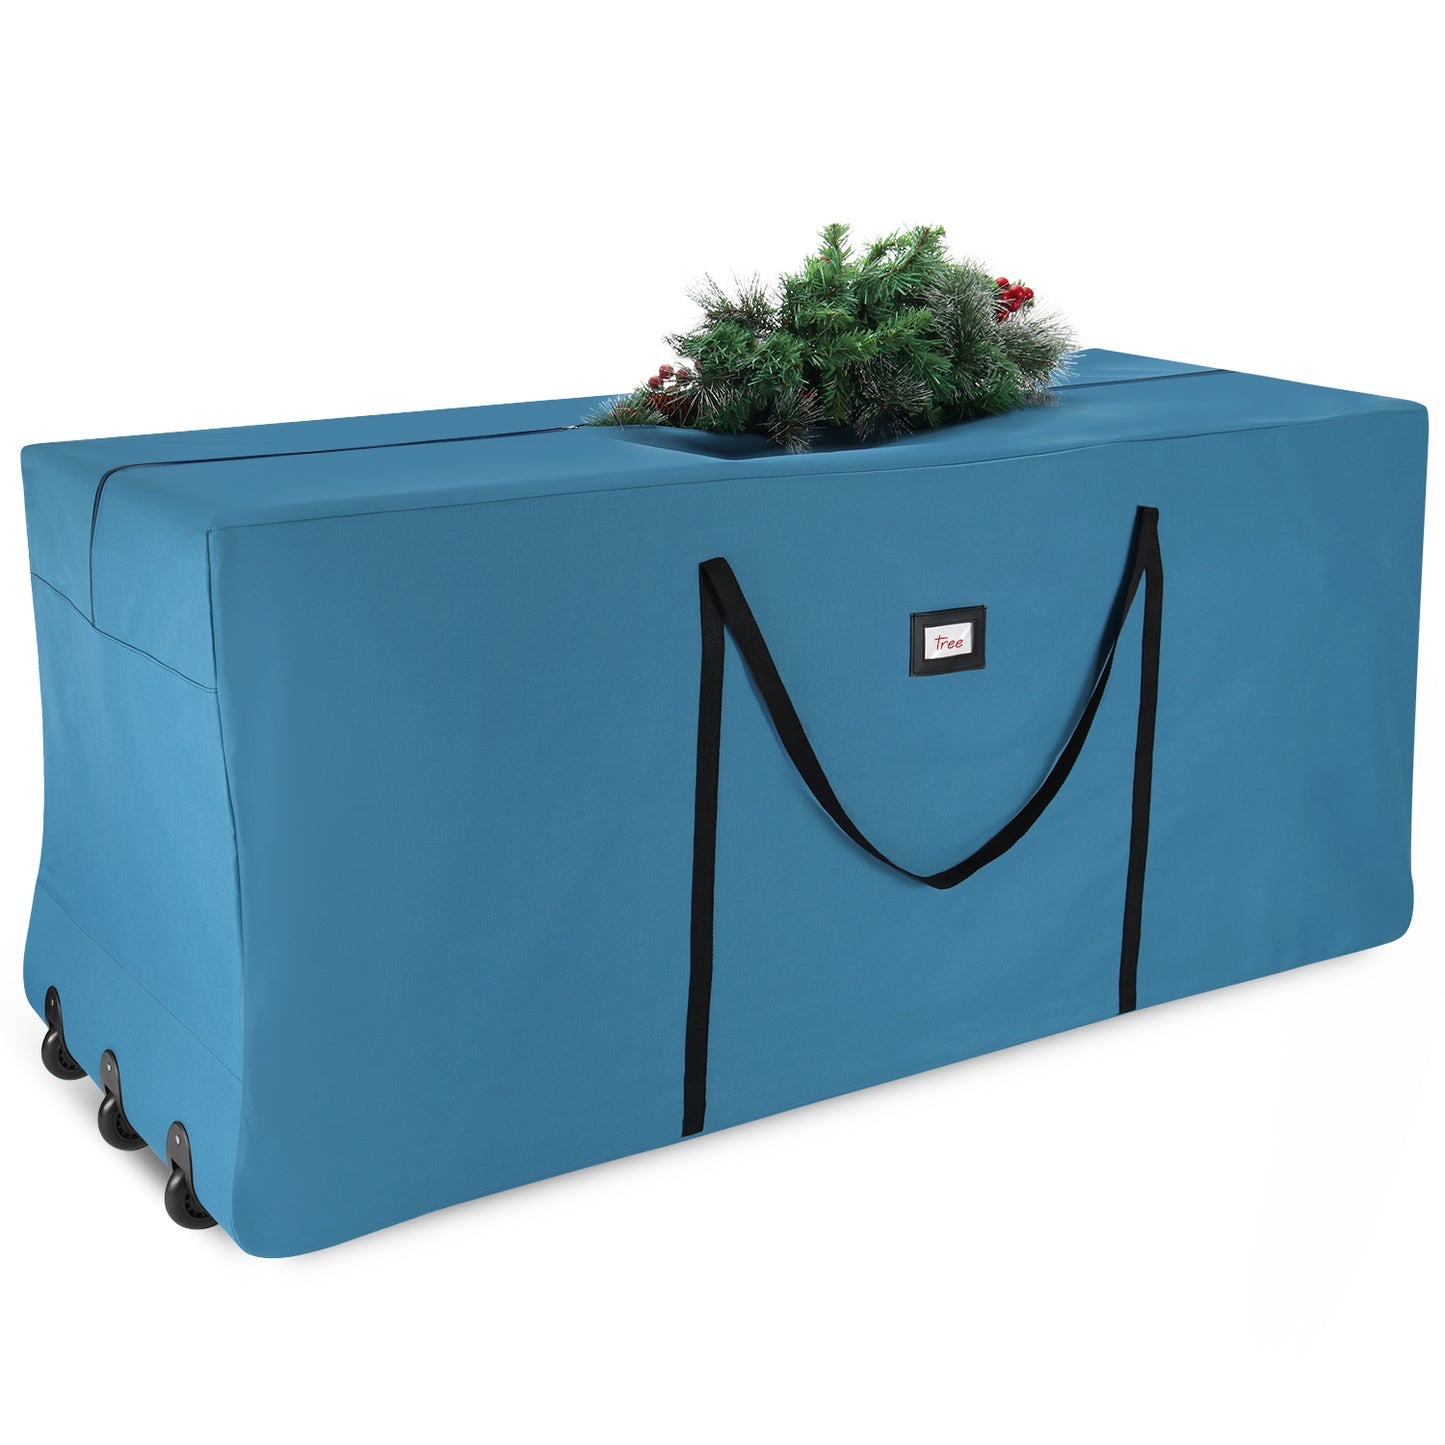 Christmas Tree Storage Bag - Extra Large Tree Rolling Storage Bag - Fits Upto 9 ft. Artificial Disassembled Trees, Durable Handles & Wheels for Easy Carrying & Transport - Tear Proof Oxford Duffle Bag